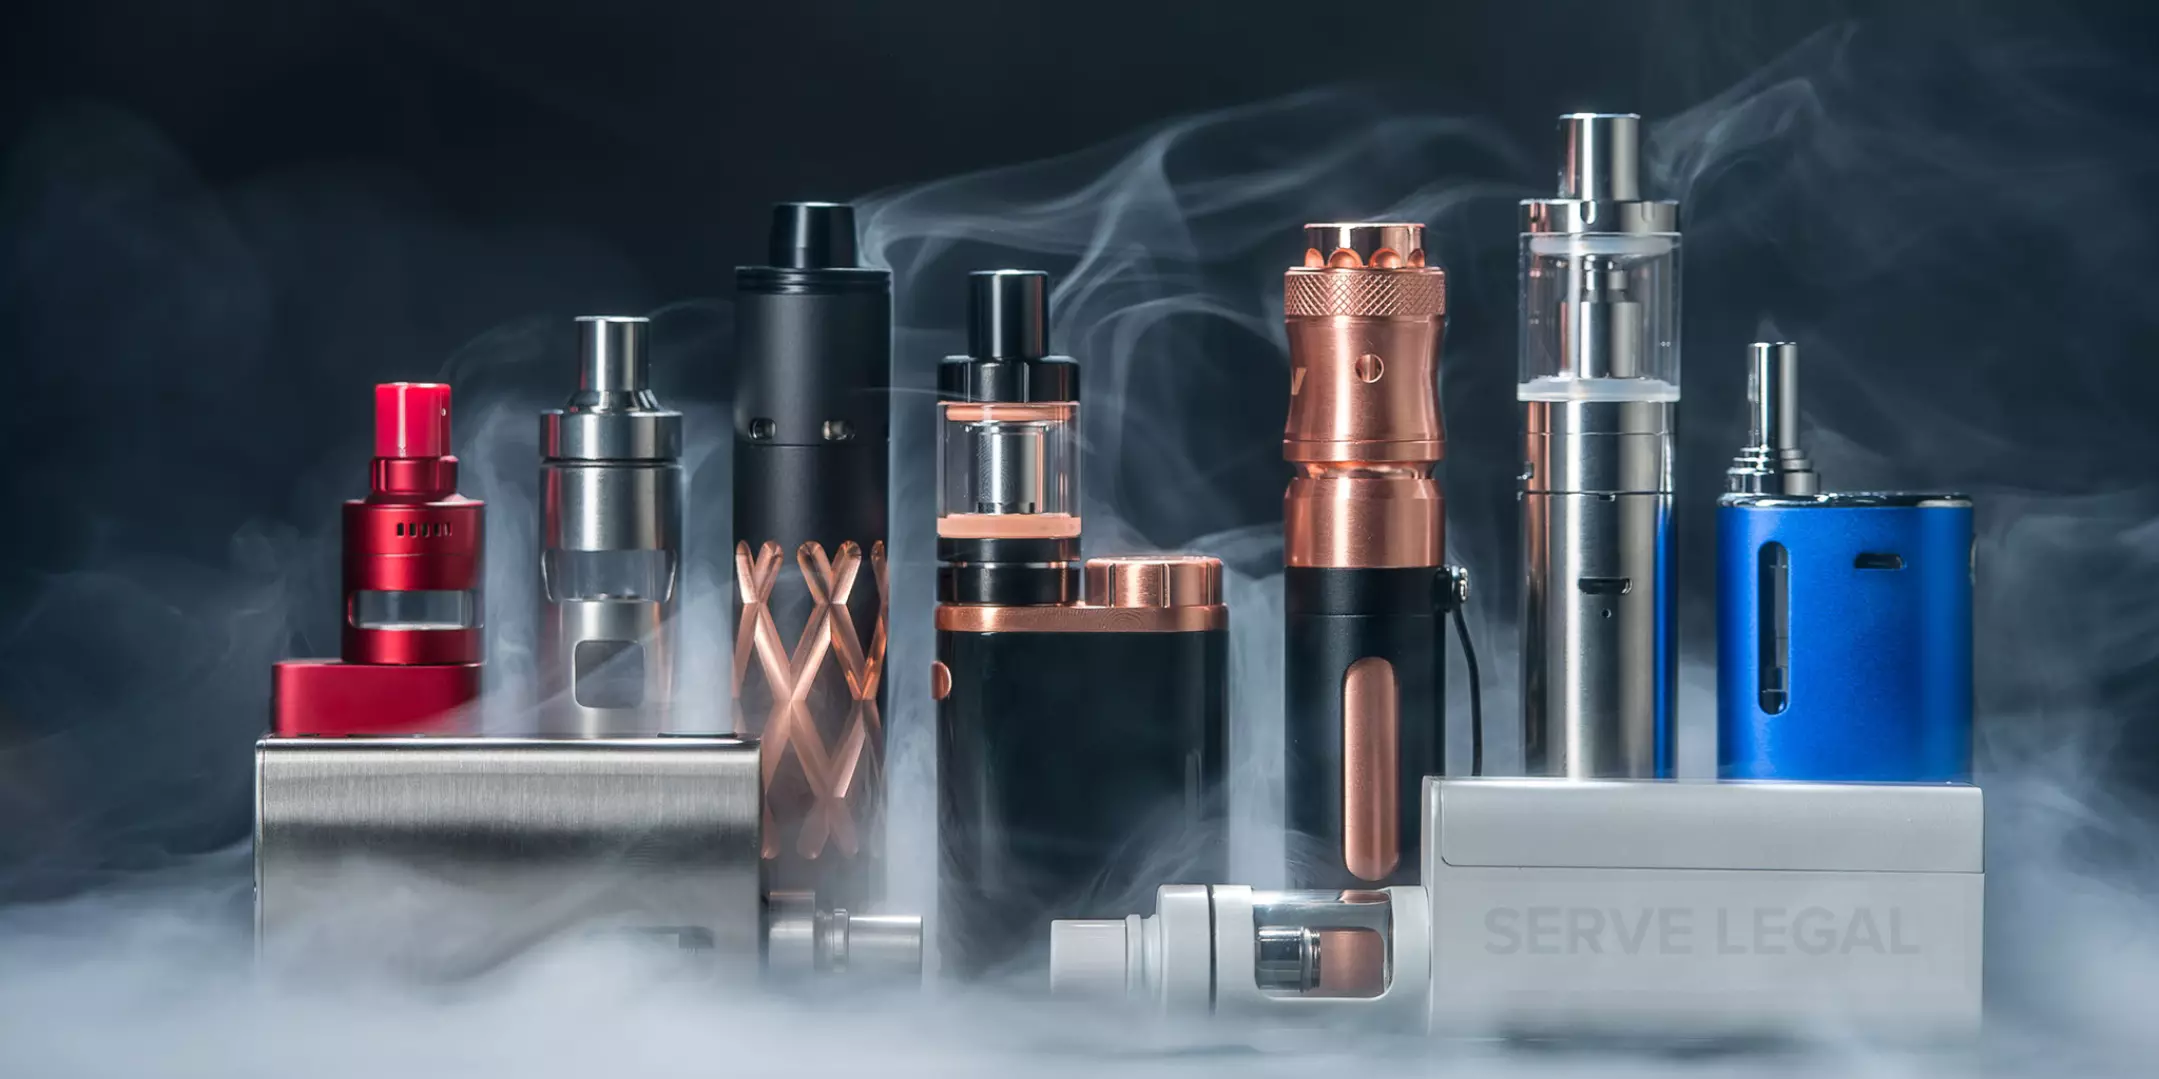 Age Verification Testing - One in Four Vapes are Sold Without ID Checks